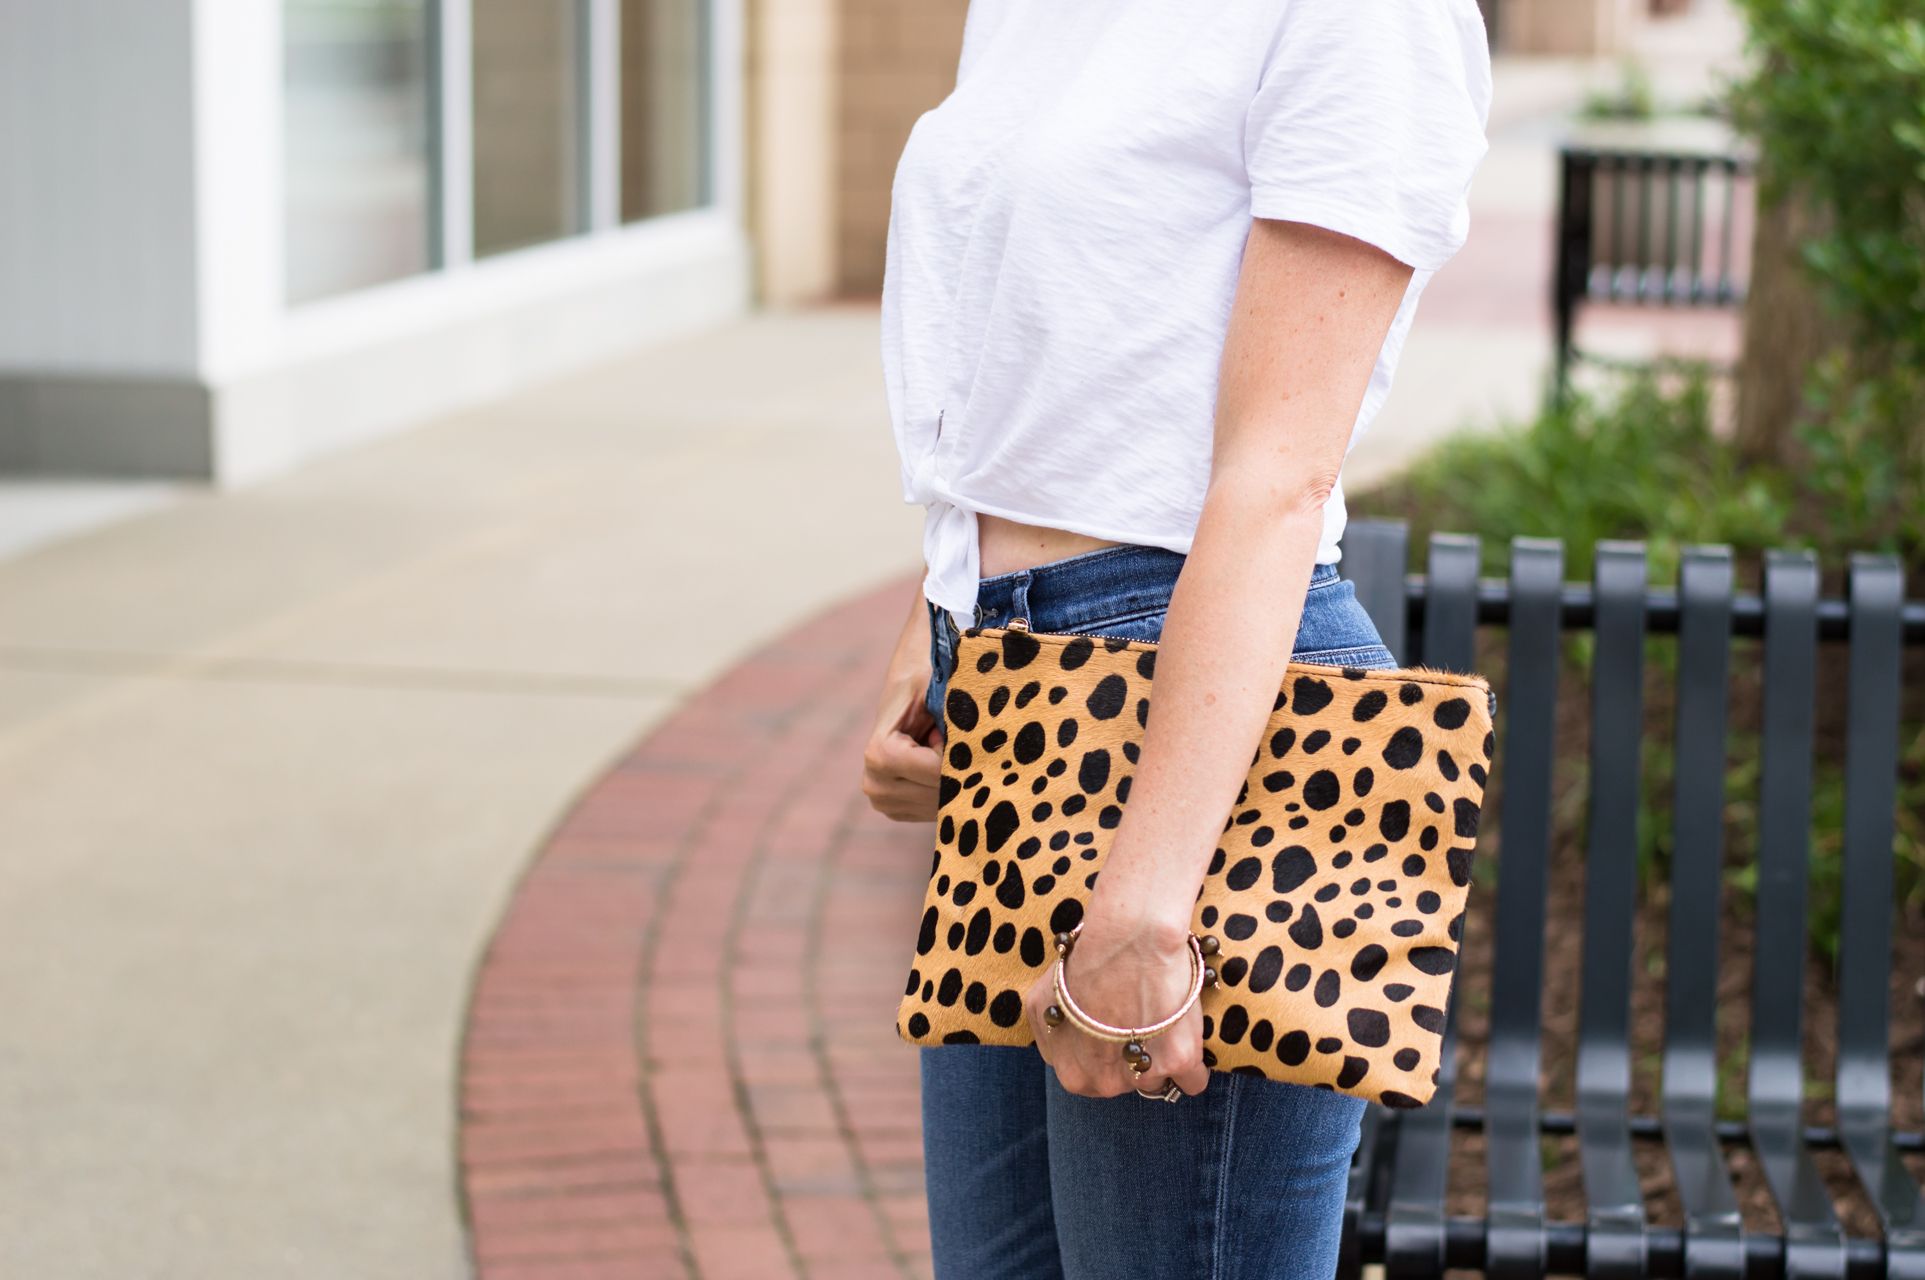 Subtle POPS OF LEOPARD with this adorable BP clutch style by Erica Valentin